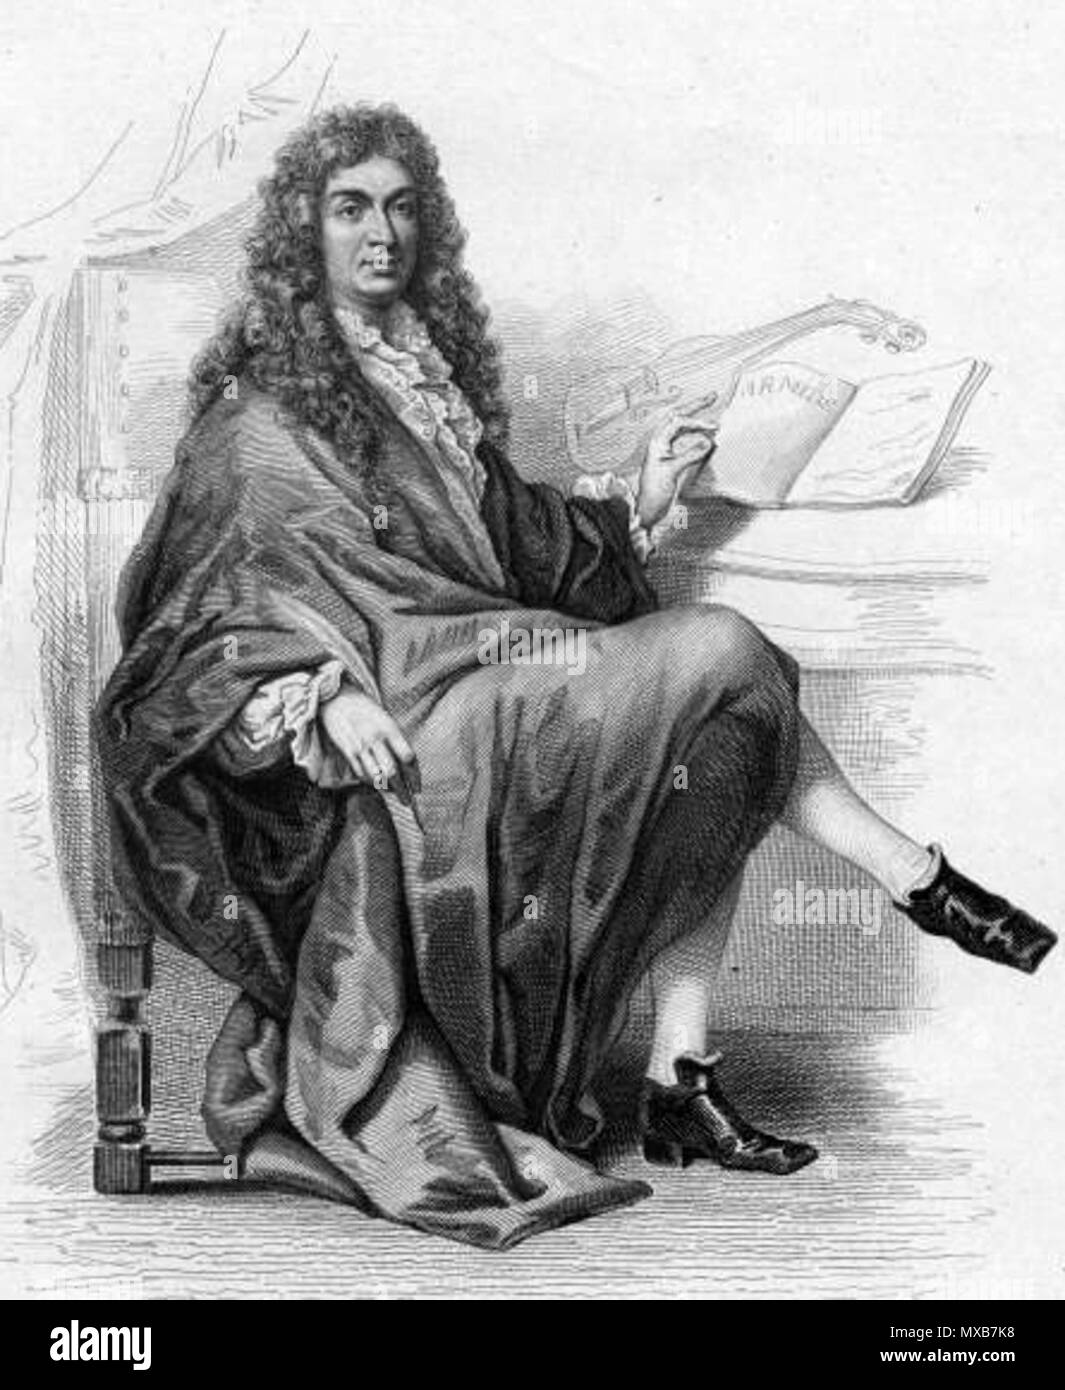 . English: Jean-Baptiste Lully (1632-1687) after a drawing by Tony Johannot (1803-1852). 19th century. Unidentified engraver after Tony Johannot 313 Jean-Baptiste Lully after Tony Johannot Stock Photo